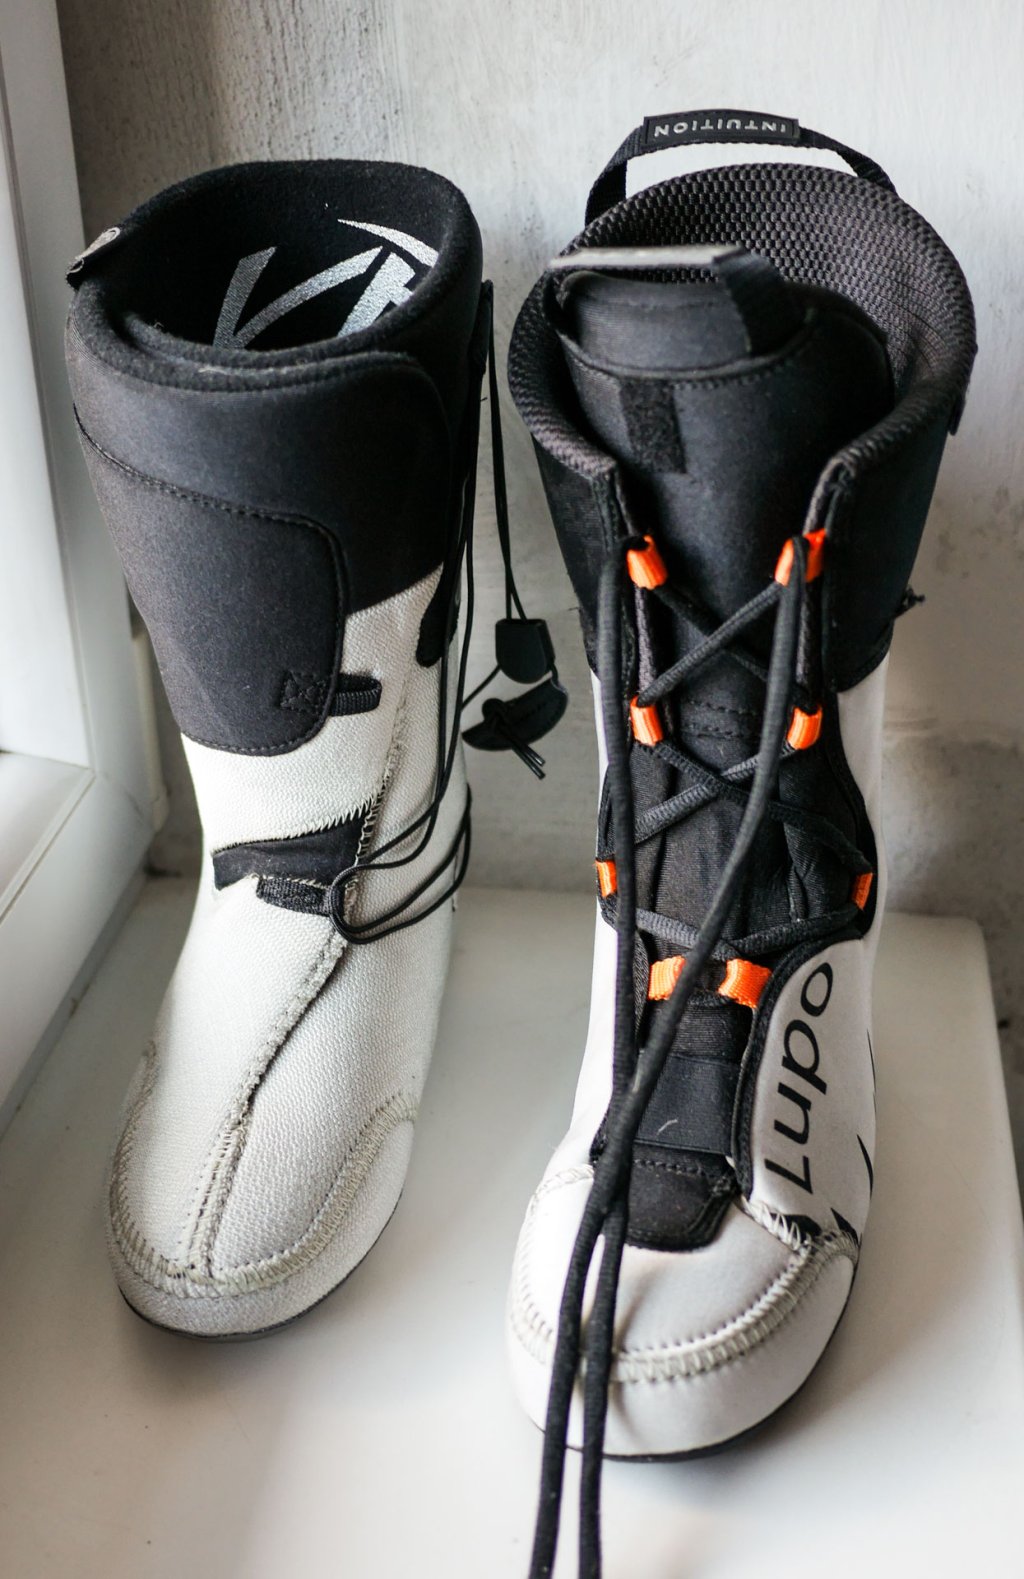 On the left the classic Overlap Intuition Liner, on the right the new Carbon T.I. with lacing and tongue.